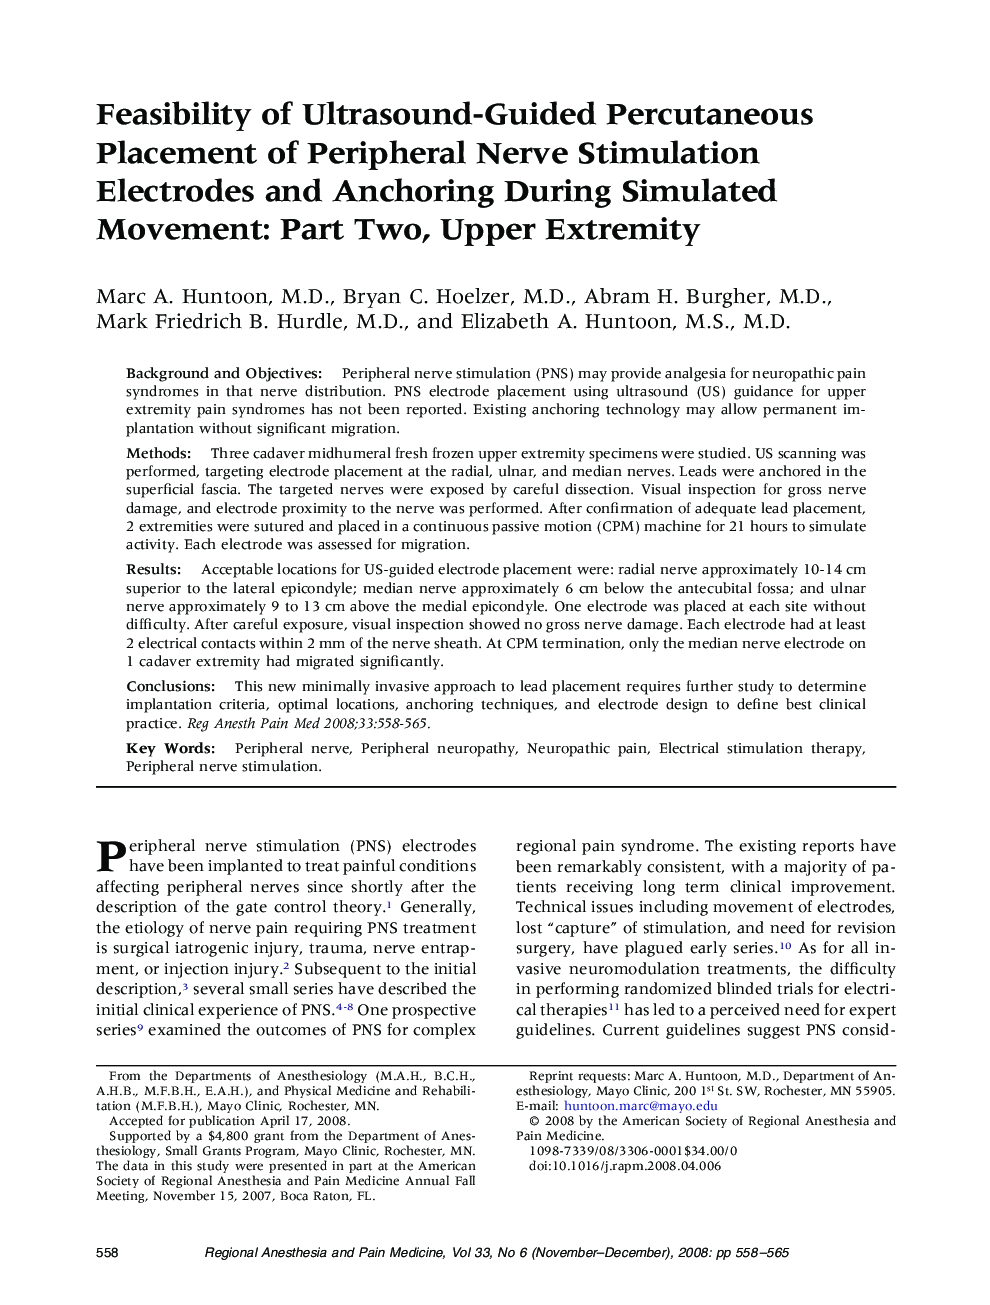 Feasibility of Ultrasound-Guided Percutaneous Placement of Peripheral Nerve Stimulation Electrodes and Anchoring During Simulated Movement: Part Two, Upper Extremity